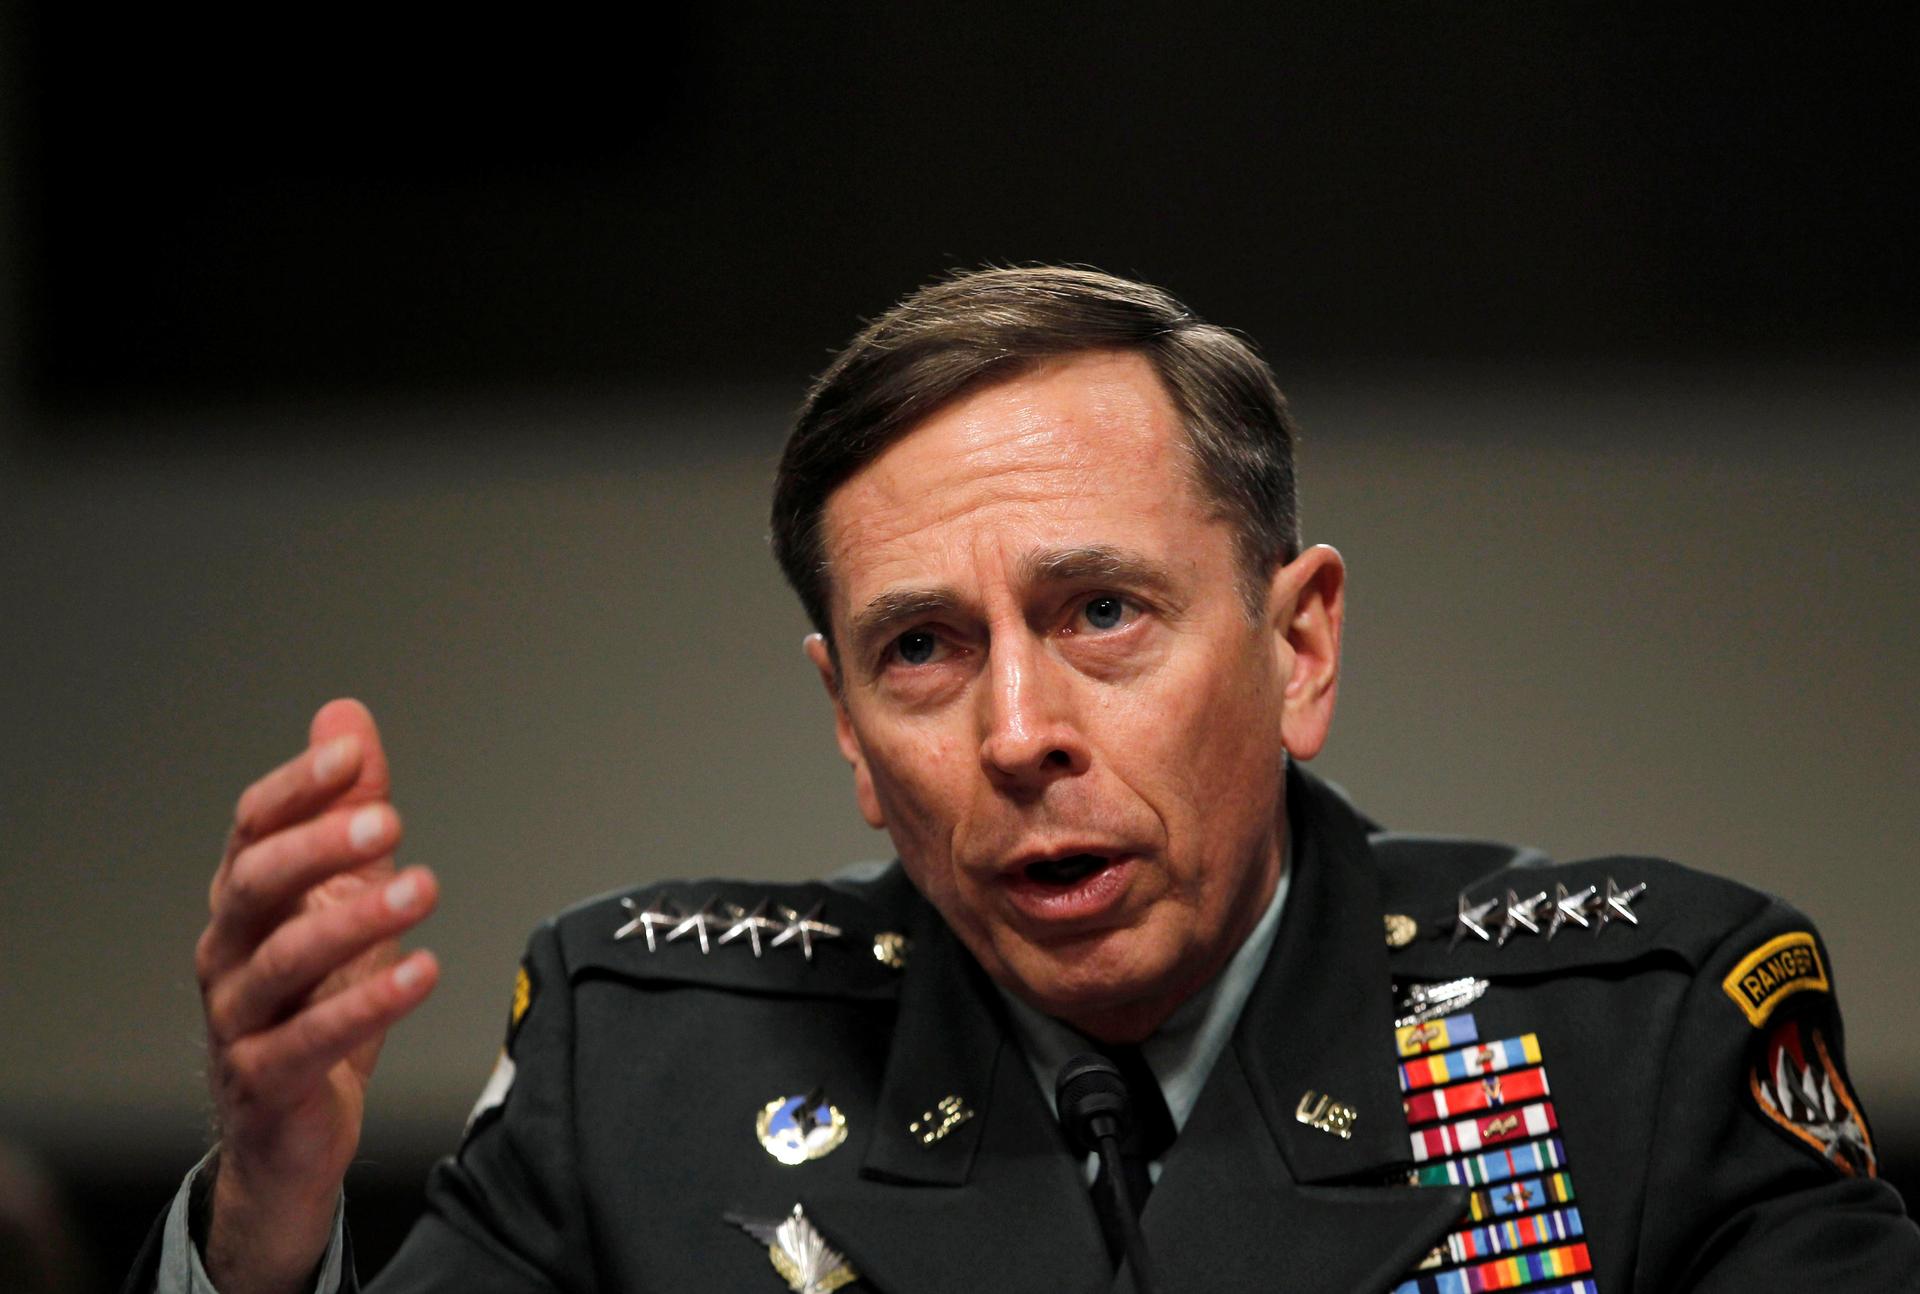 Gen. General David Petraeus, commander of the international security assistance force and commander of US Forces in Afghanistan, testifies at a Senate Armed Services committee hearing on the situation in Afghanistan, on Capitol Hill in Washington, DC.